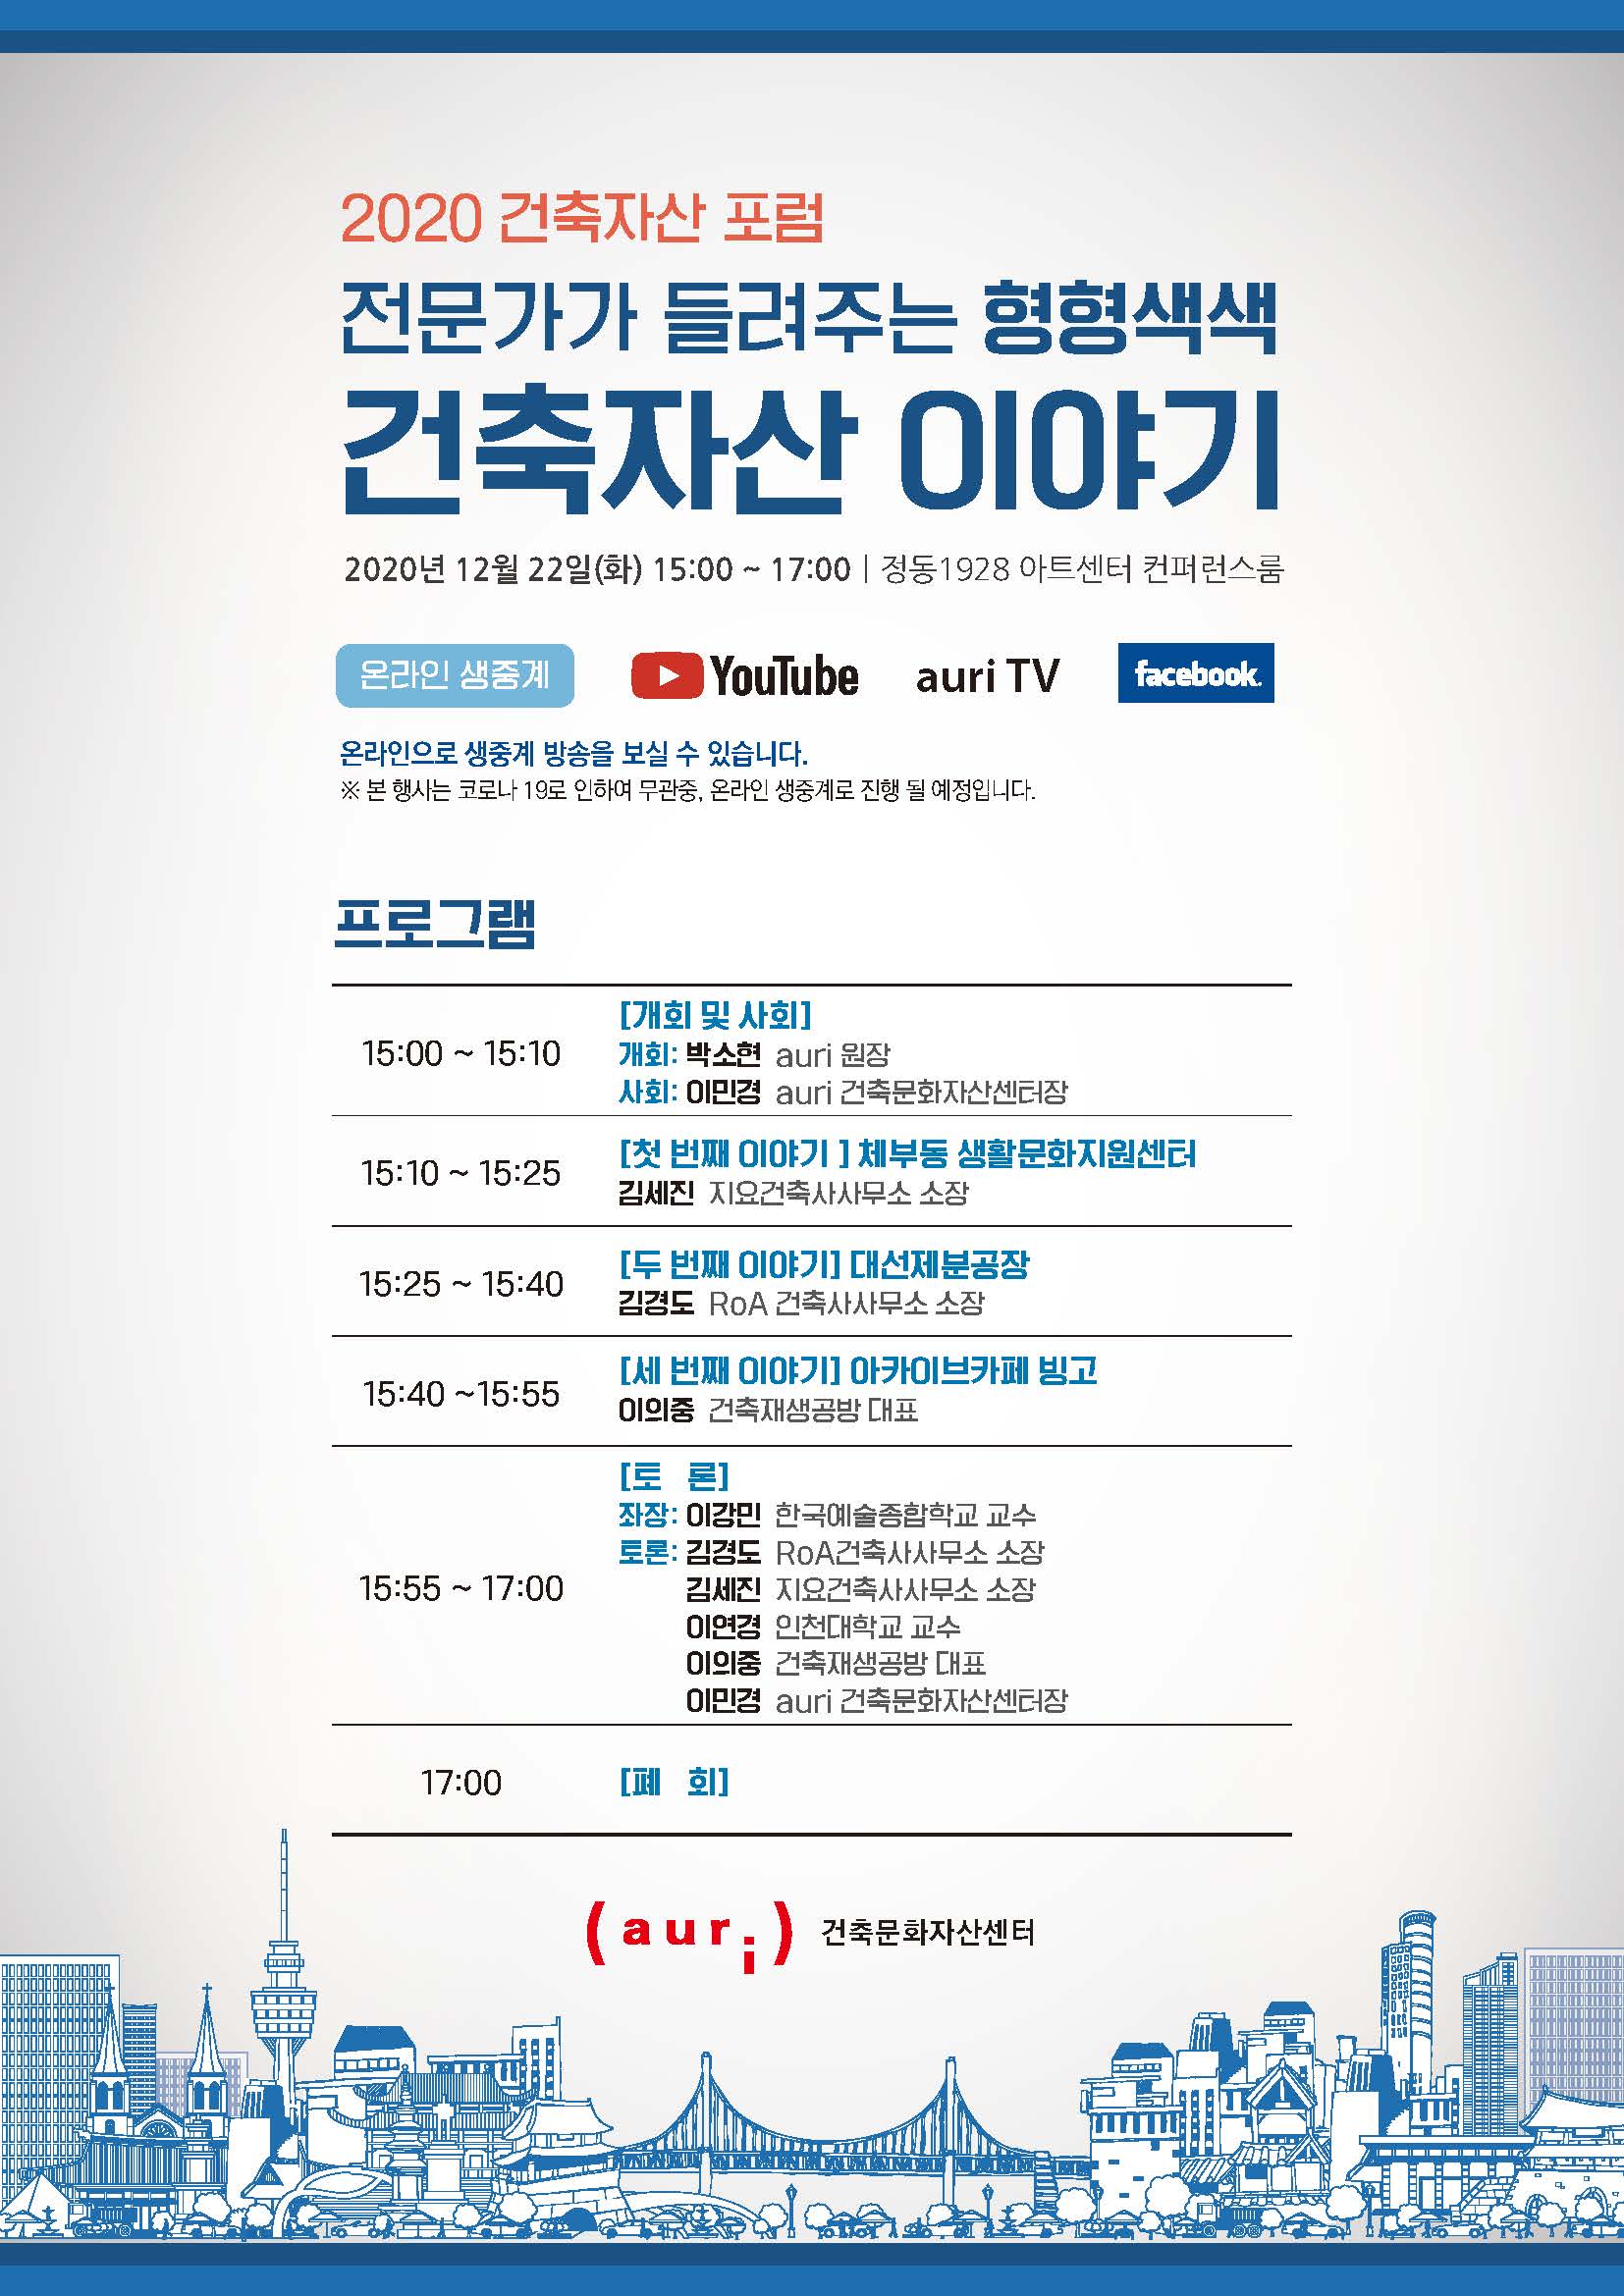 You are currently viewing ‘2020 건축자산 포럼’ 개최